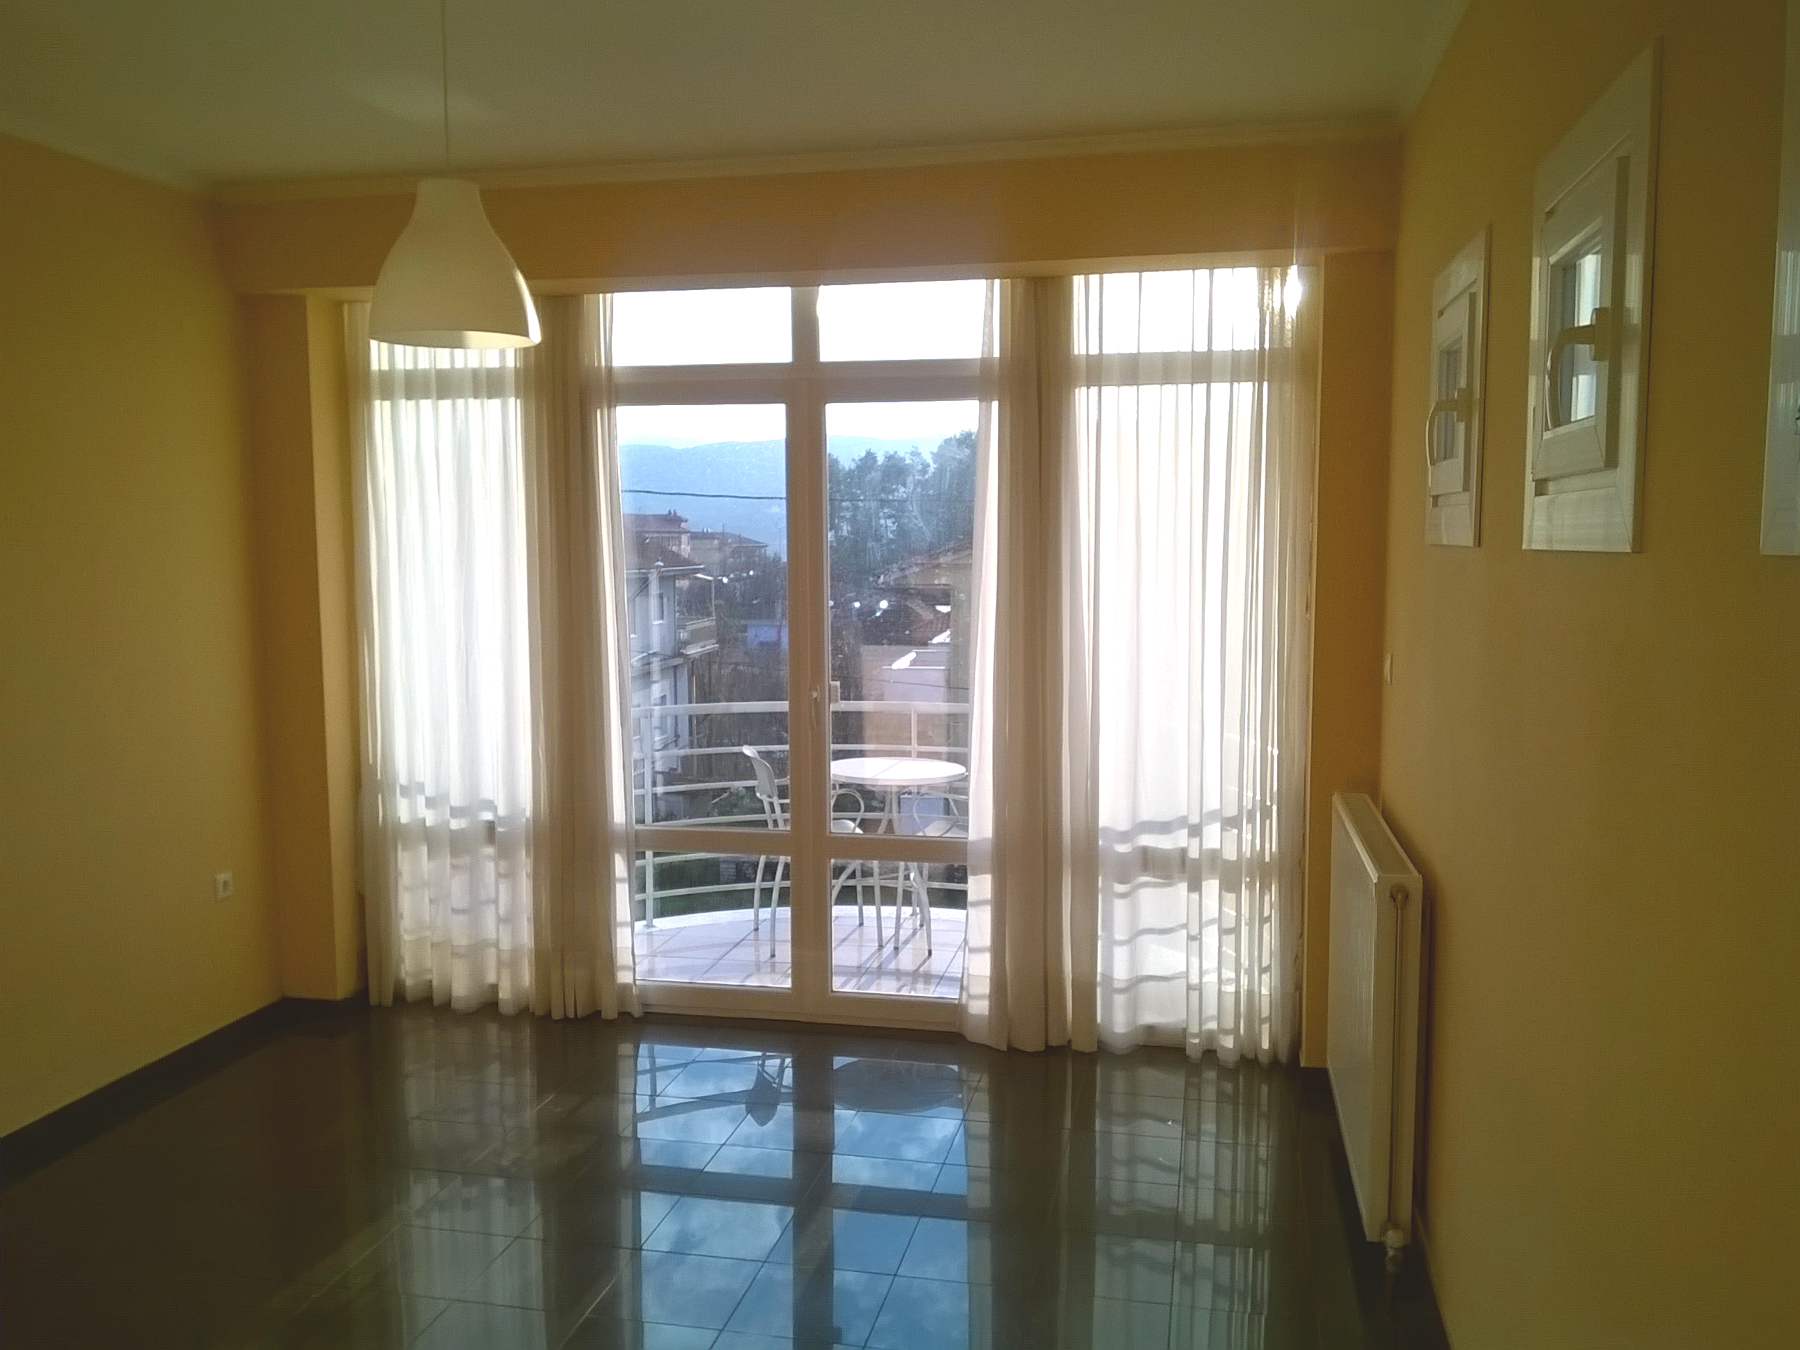 1 bedroom apartment for rent, 50 sq.m. 1st floor for students in the area of Domboli in Ioannina